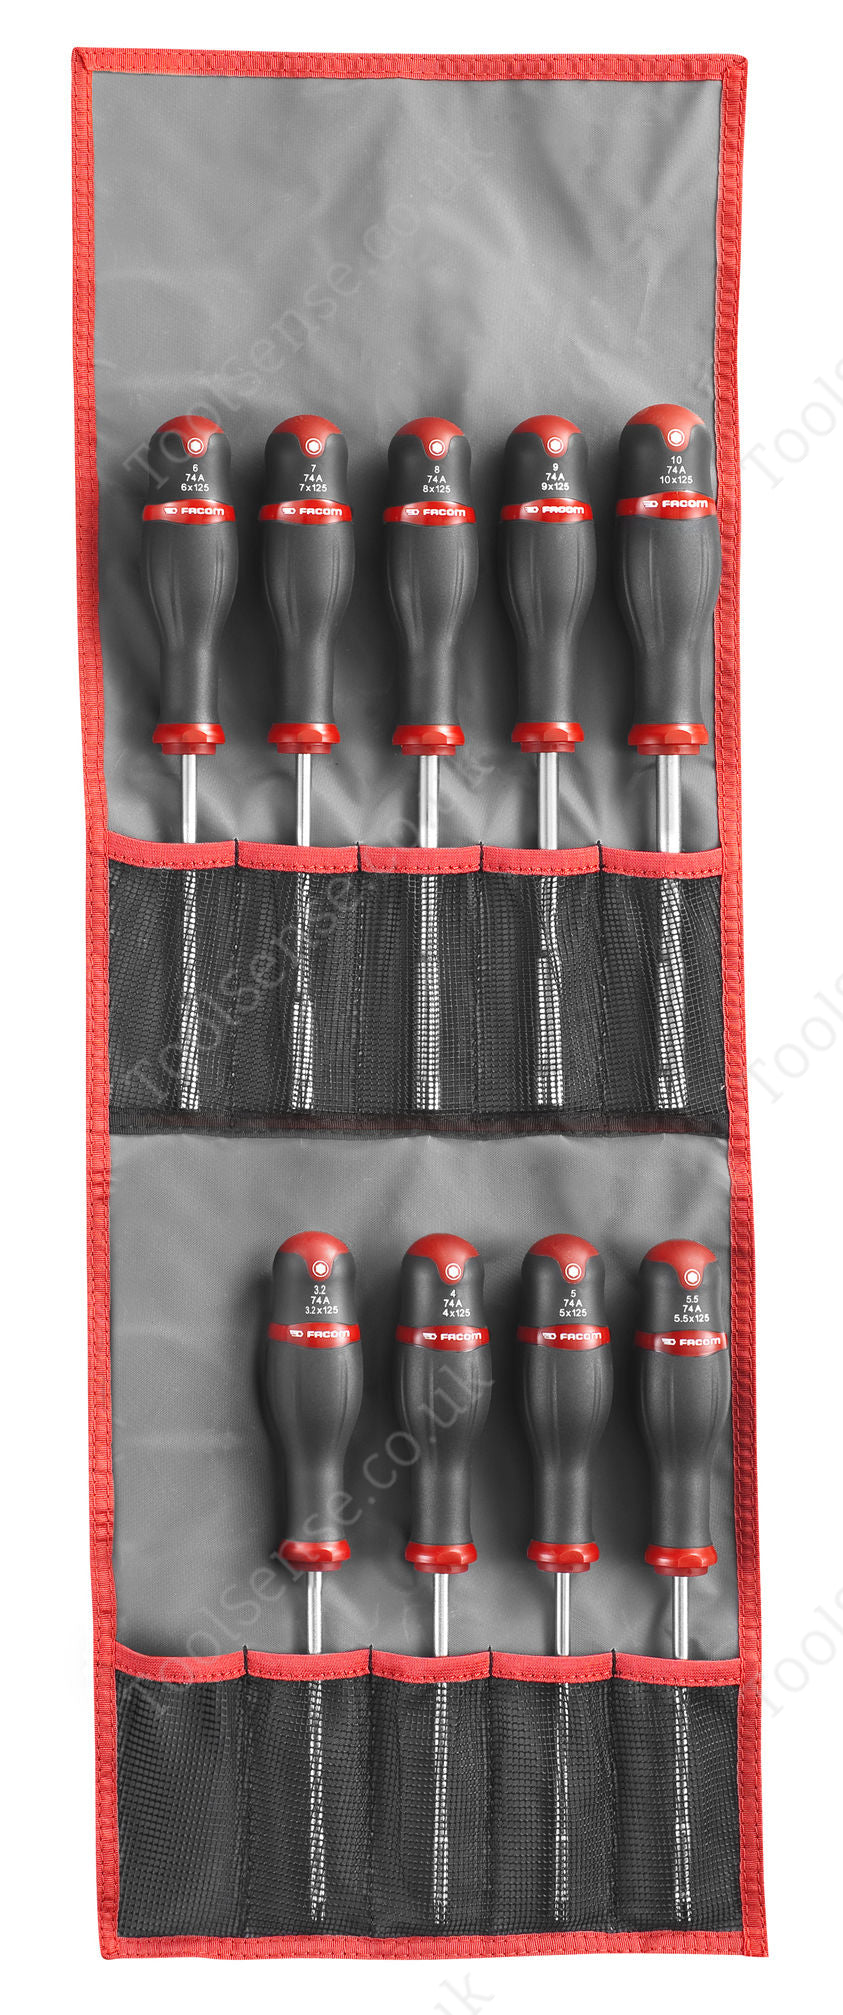 Facom 74A.JL9 74A - Forged Socket Wrenches Set With Metric Screwdriver Handle